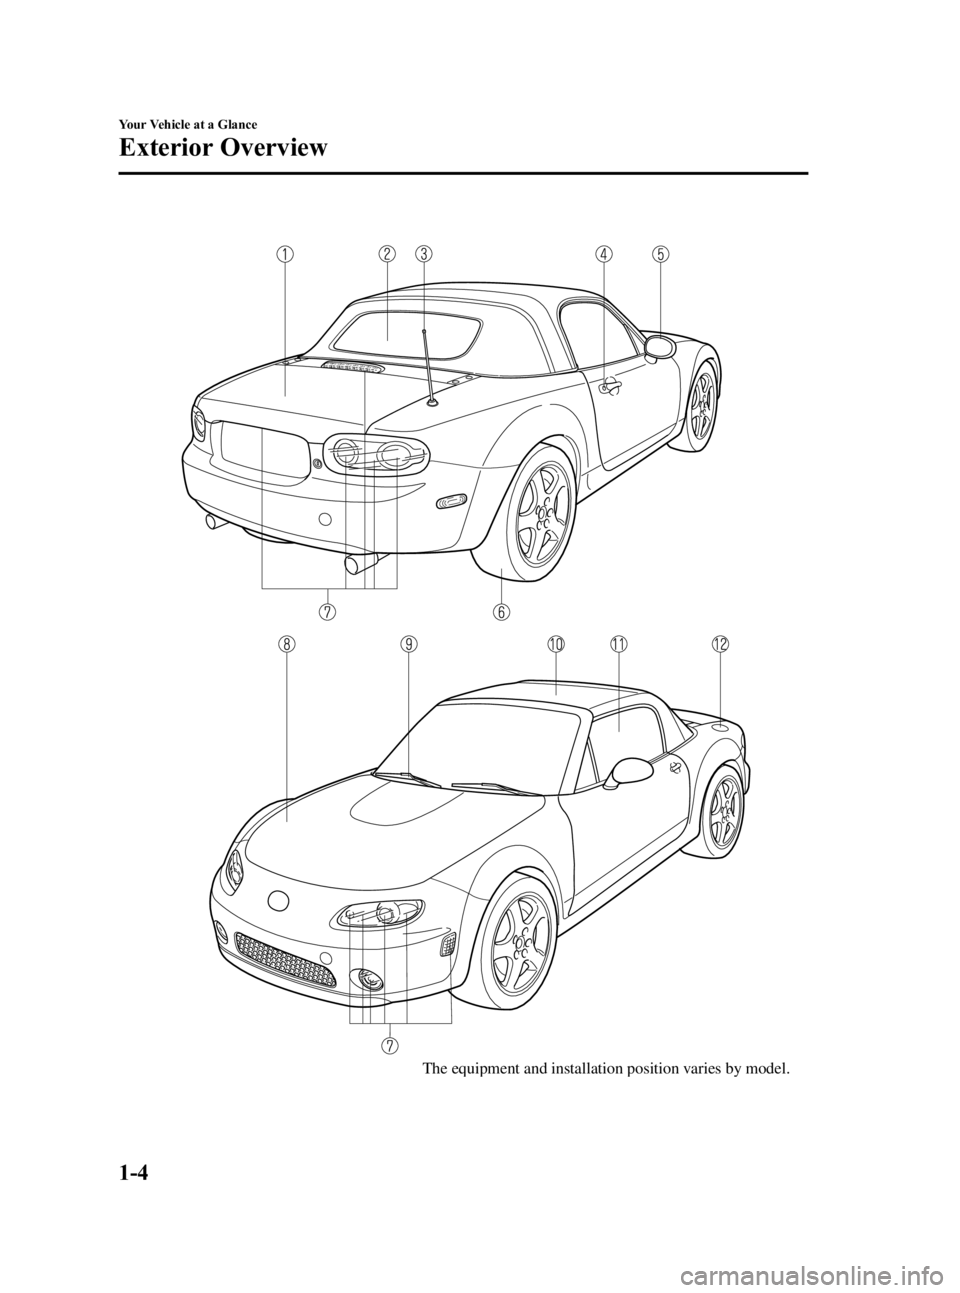 MAZDA MODEL MX-5 MIATA 2006  Owners Manual Black plate (10,1)
The equipment and installation position varies by model.
1-4
Your Vehicle at a Glance
Exterior Overview
MX-5_8U35-EA-05F_Edition4 Page10
Thursday, October 6 2005 11:2 AM
Form No.8U3